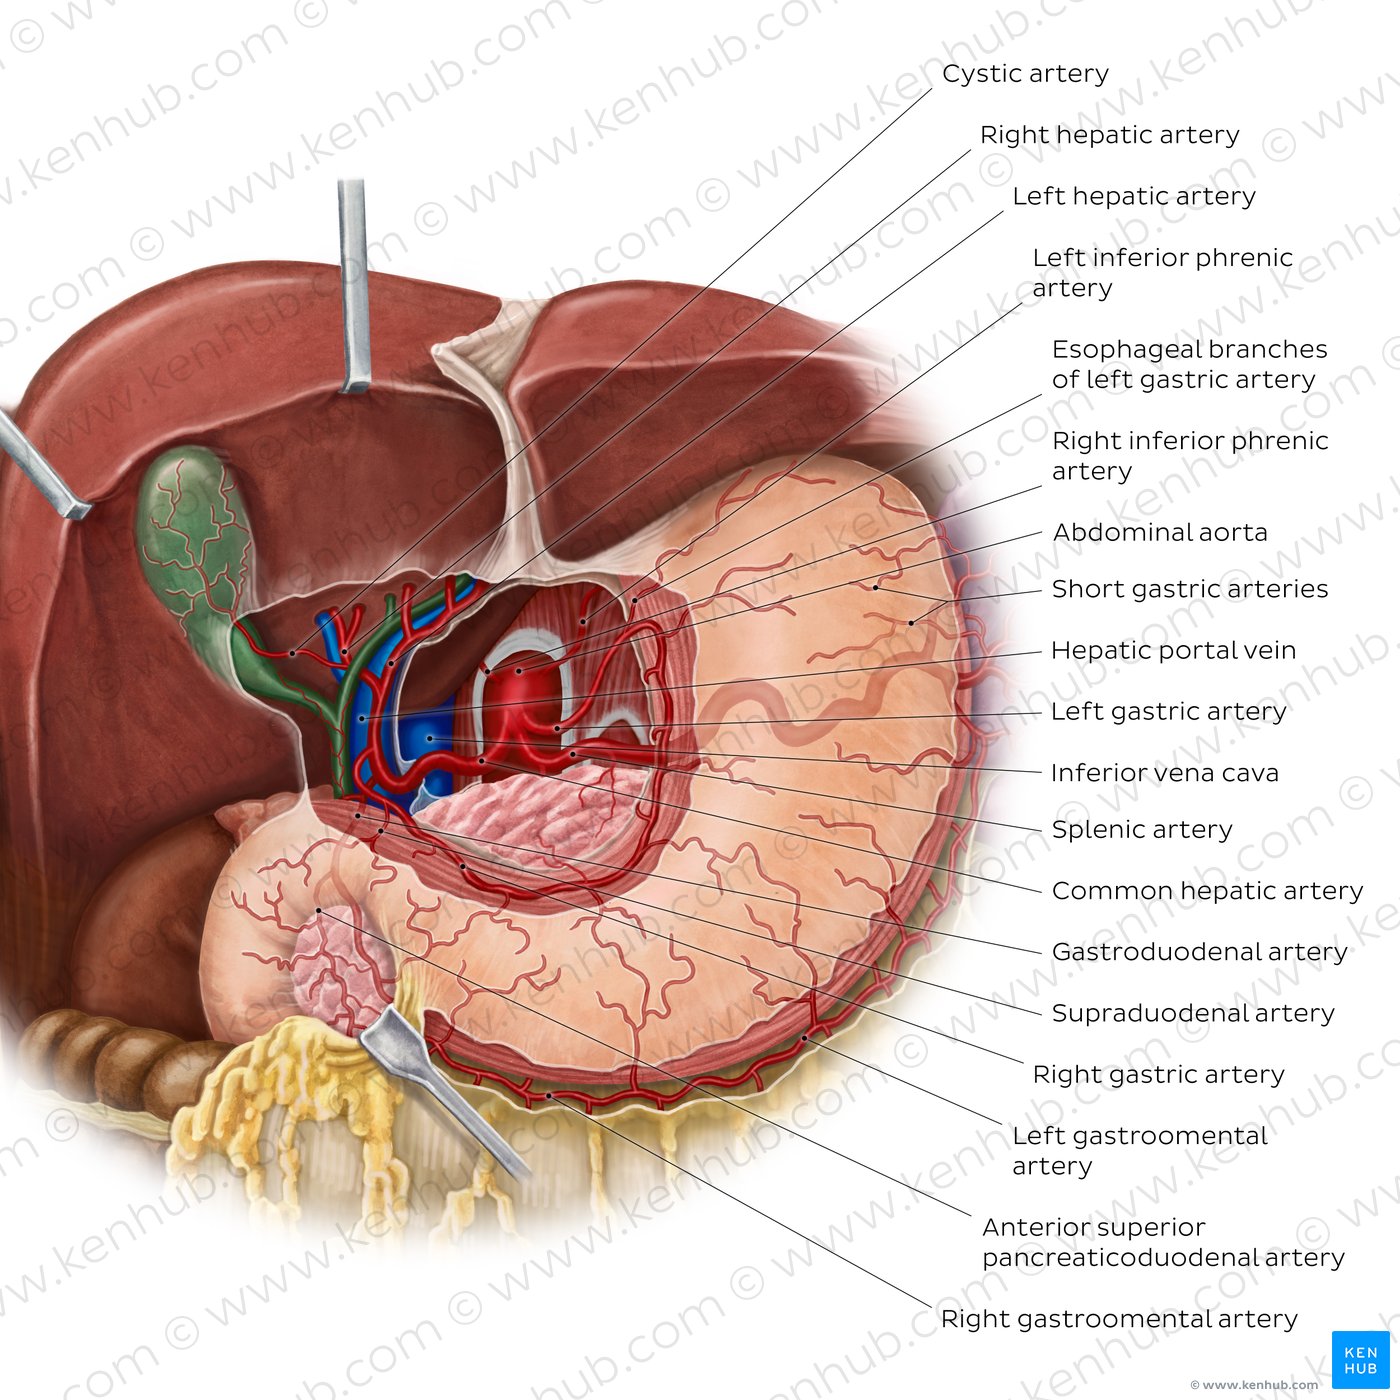 Arteries of the stomach, liver and spleen (anterior view)